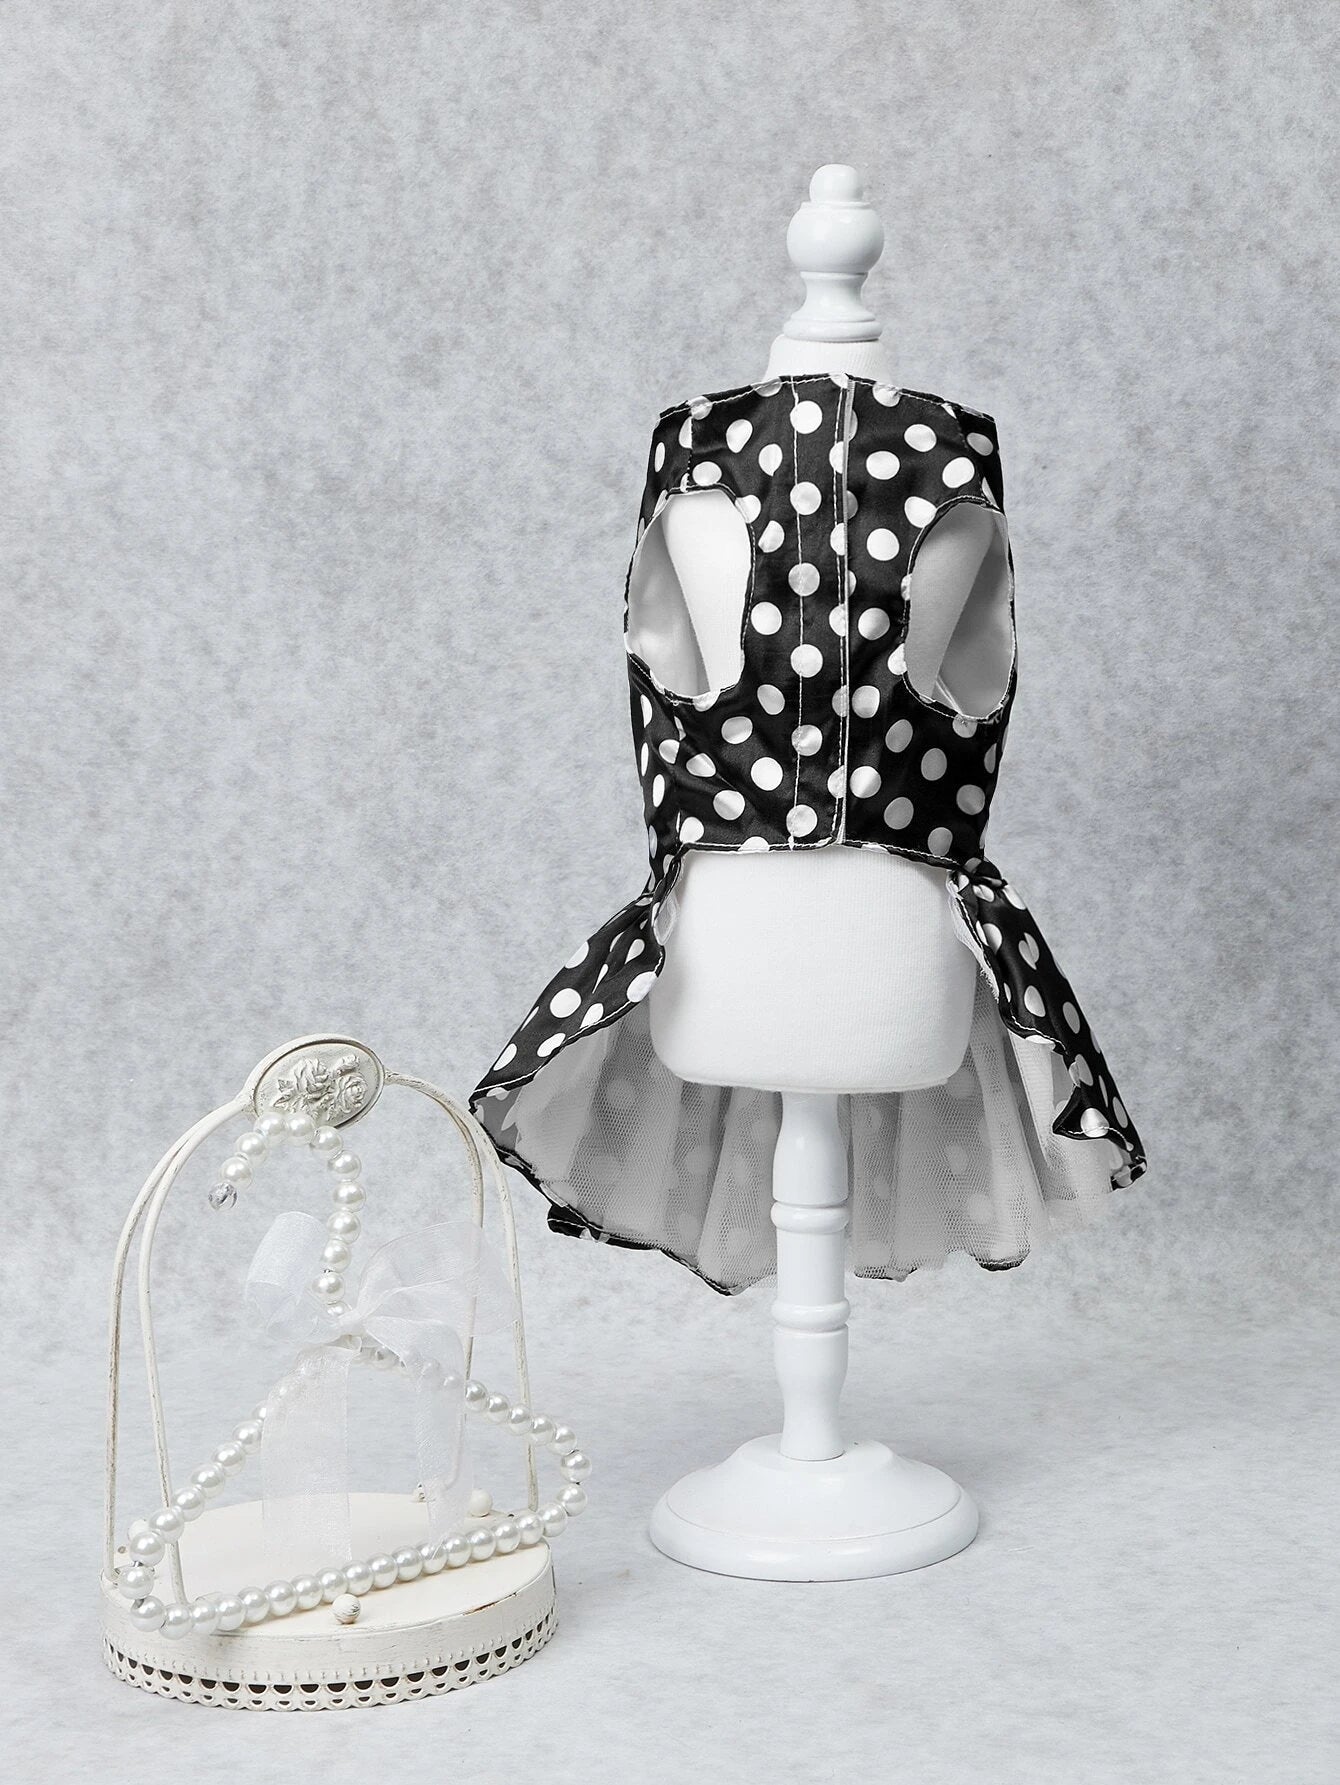 The Black & White Dots Dog Dress - Pretty Paws Luxury Couture